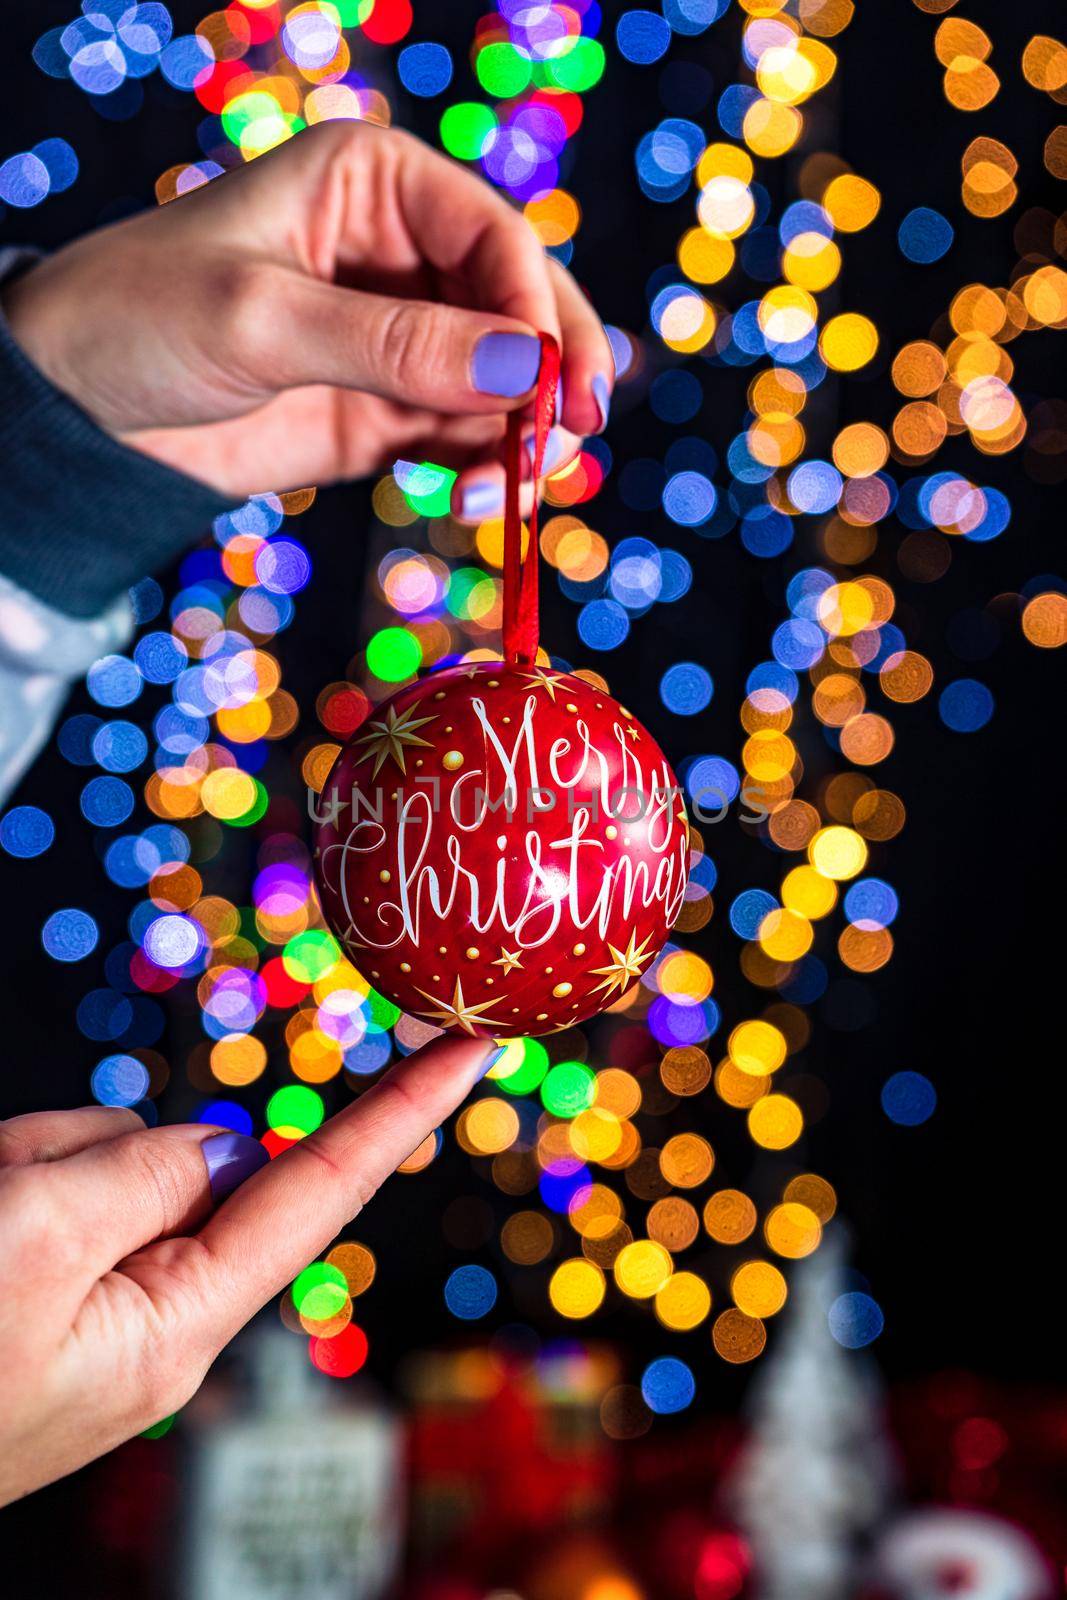 Holding Merry Christmas bauble decoration isolated on background with blurred lights. December season, Christmas composition. by vladispas